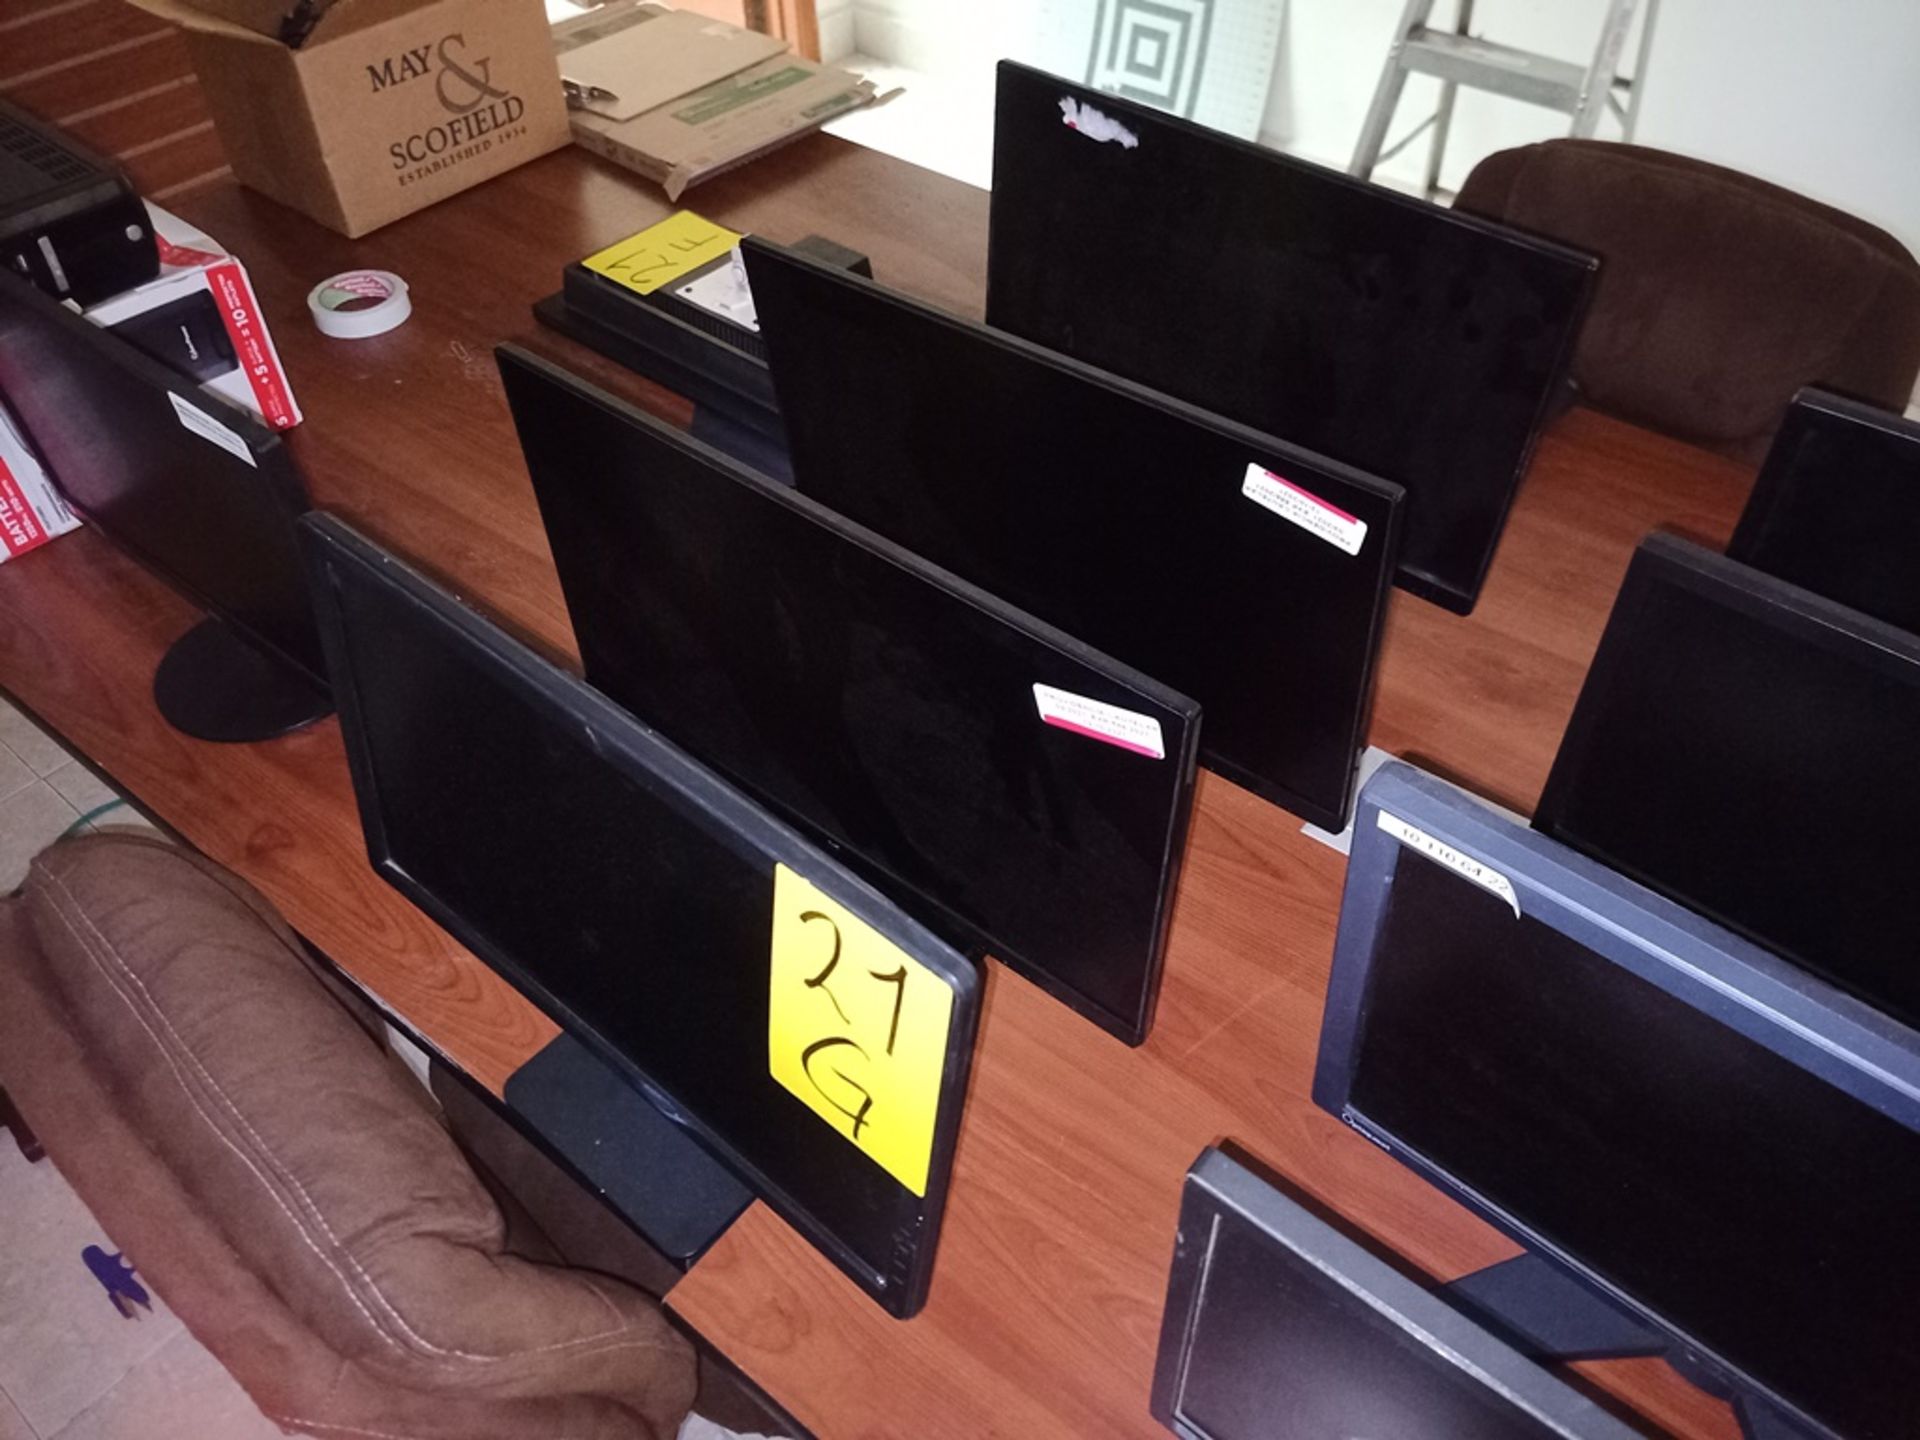 Lot of 6 Monitors contains: 6 Monitors of 17" brands Samsung, Acer, ADC, Dell. Please inspect. - Image 3 of 8